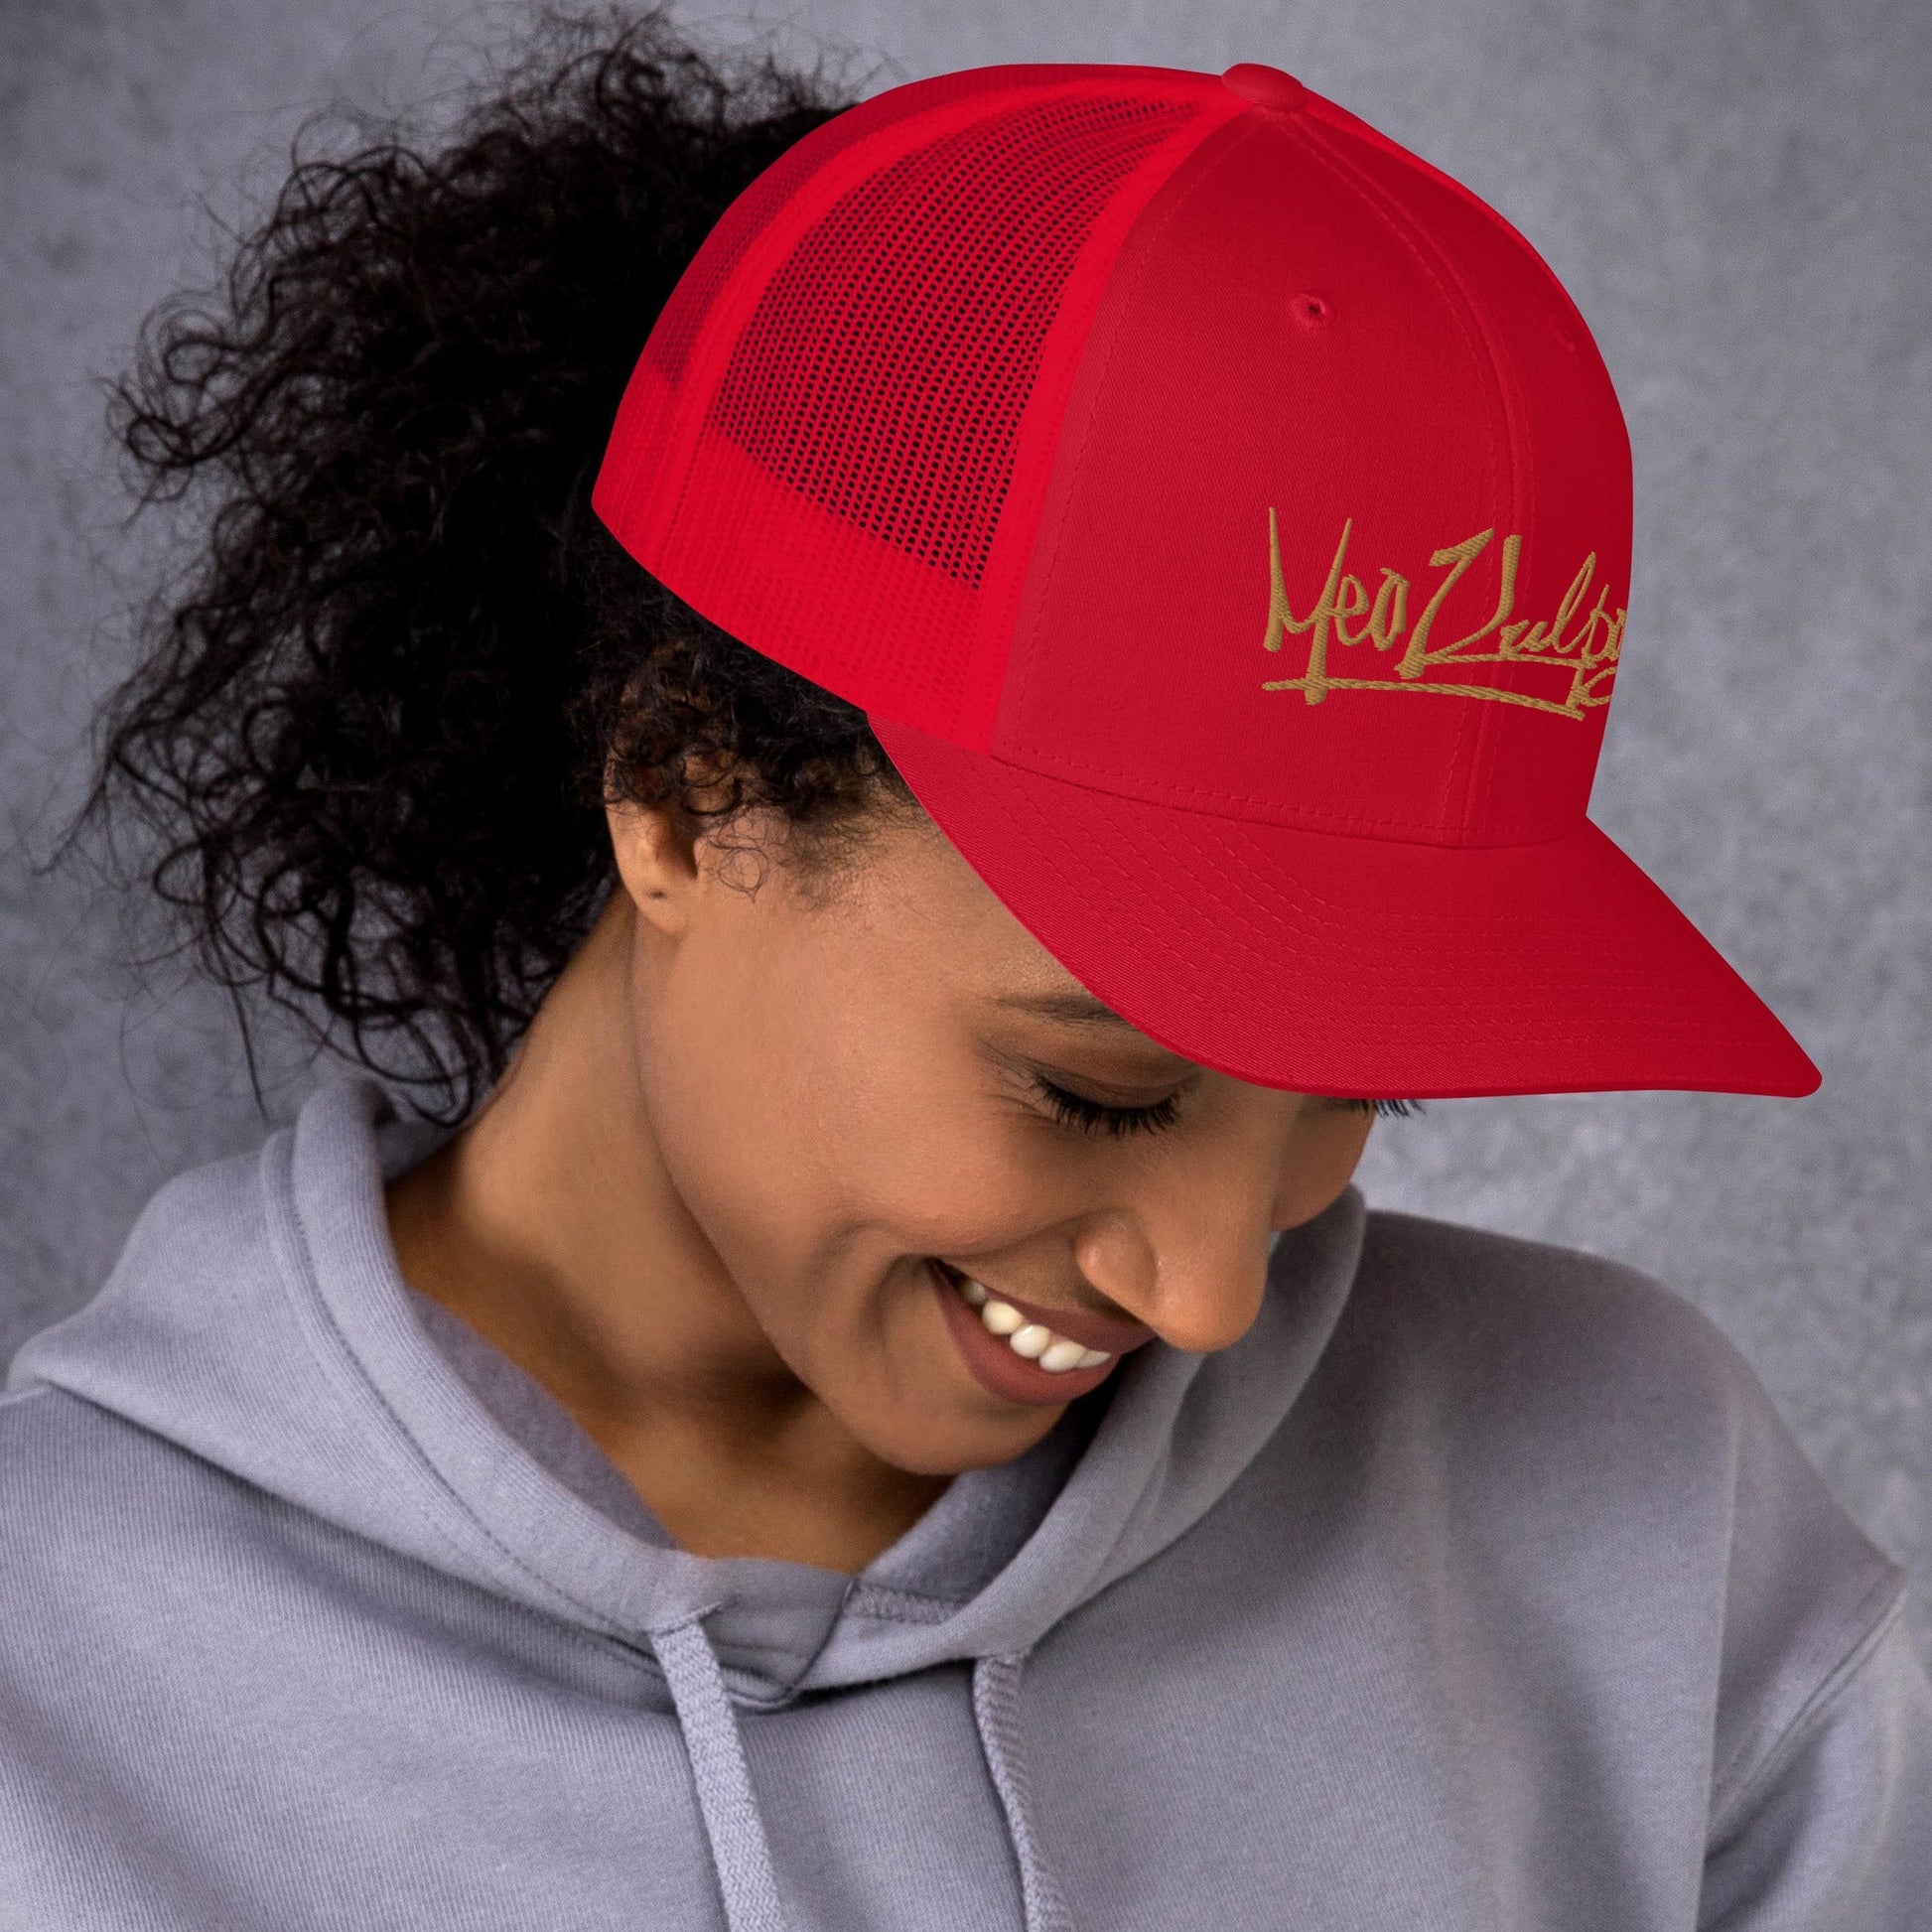 MeaKulpa Red Trucker Cap can be worn by both men and women -  Experience the MeaKulpa lifestyle in the great outdoors. This lifestyle shot captures the Red Trucker Cap in action, blending seamlessly with nature. The gold logo adds a touch of opulence to your everyday adventures.